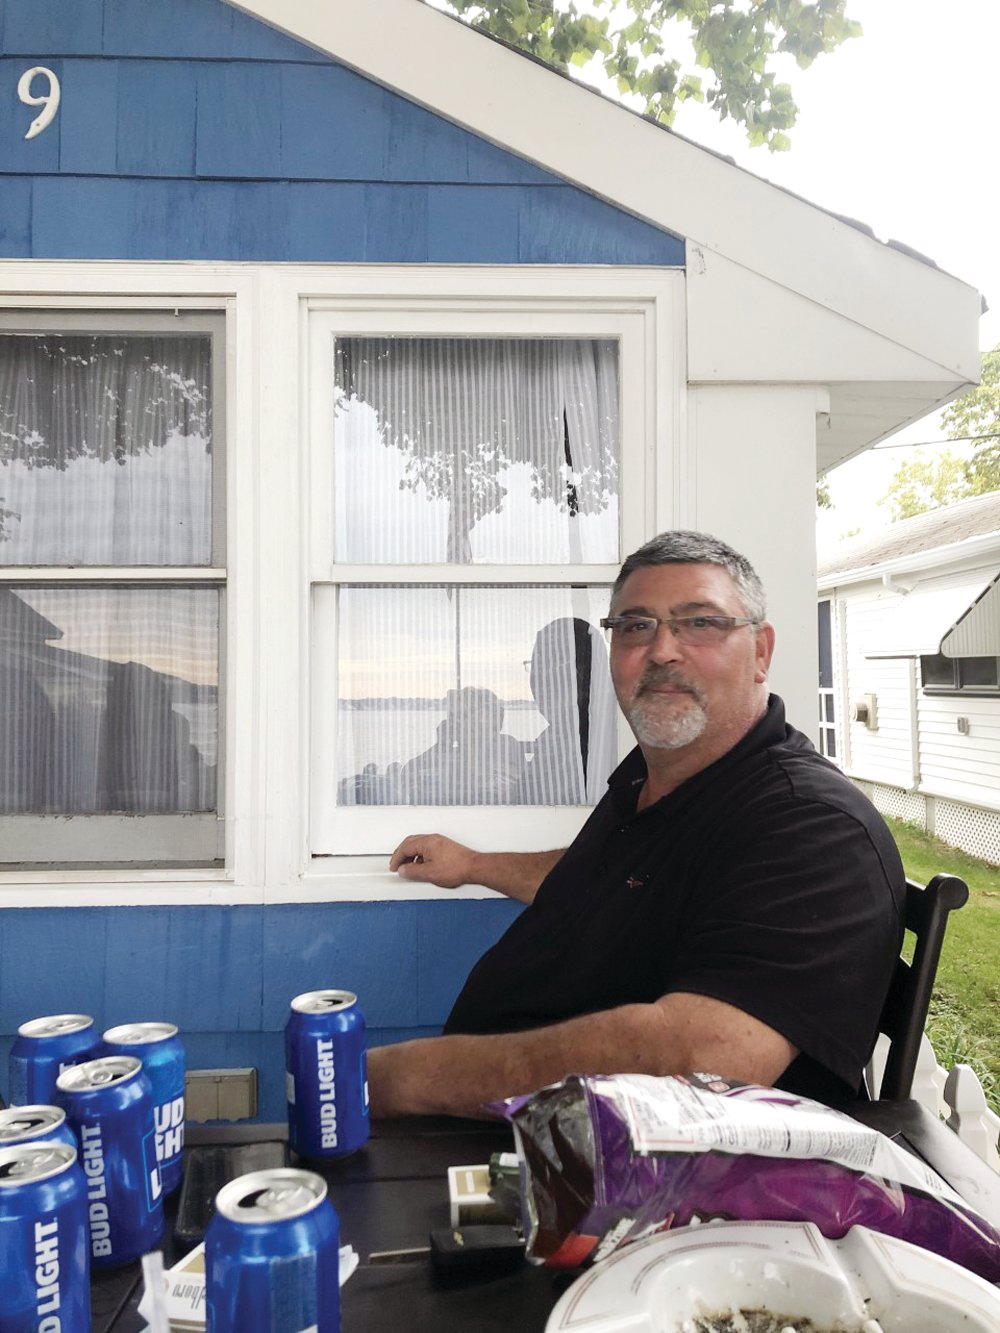 BUD LIGHTS FOR BILLY: Patti and Jackie would like to help those with aspirations like Billy’s by creating a scholarship at Johnson and Wales University. They will hold a fundraiser on Aug. 20 at their Warwick location and $1 from each can of Bud Light sold will go toward the scholarship.